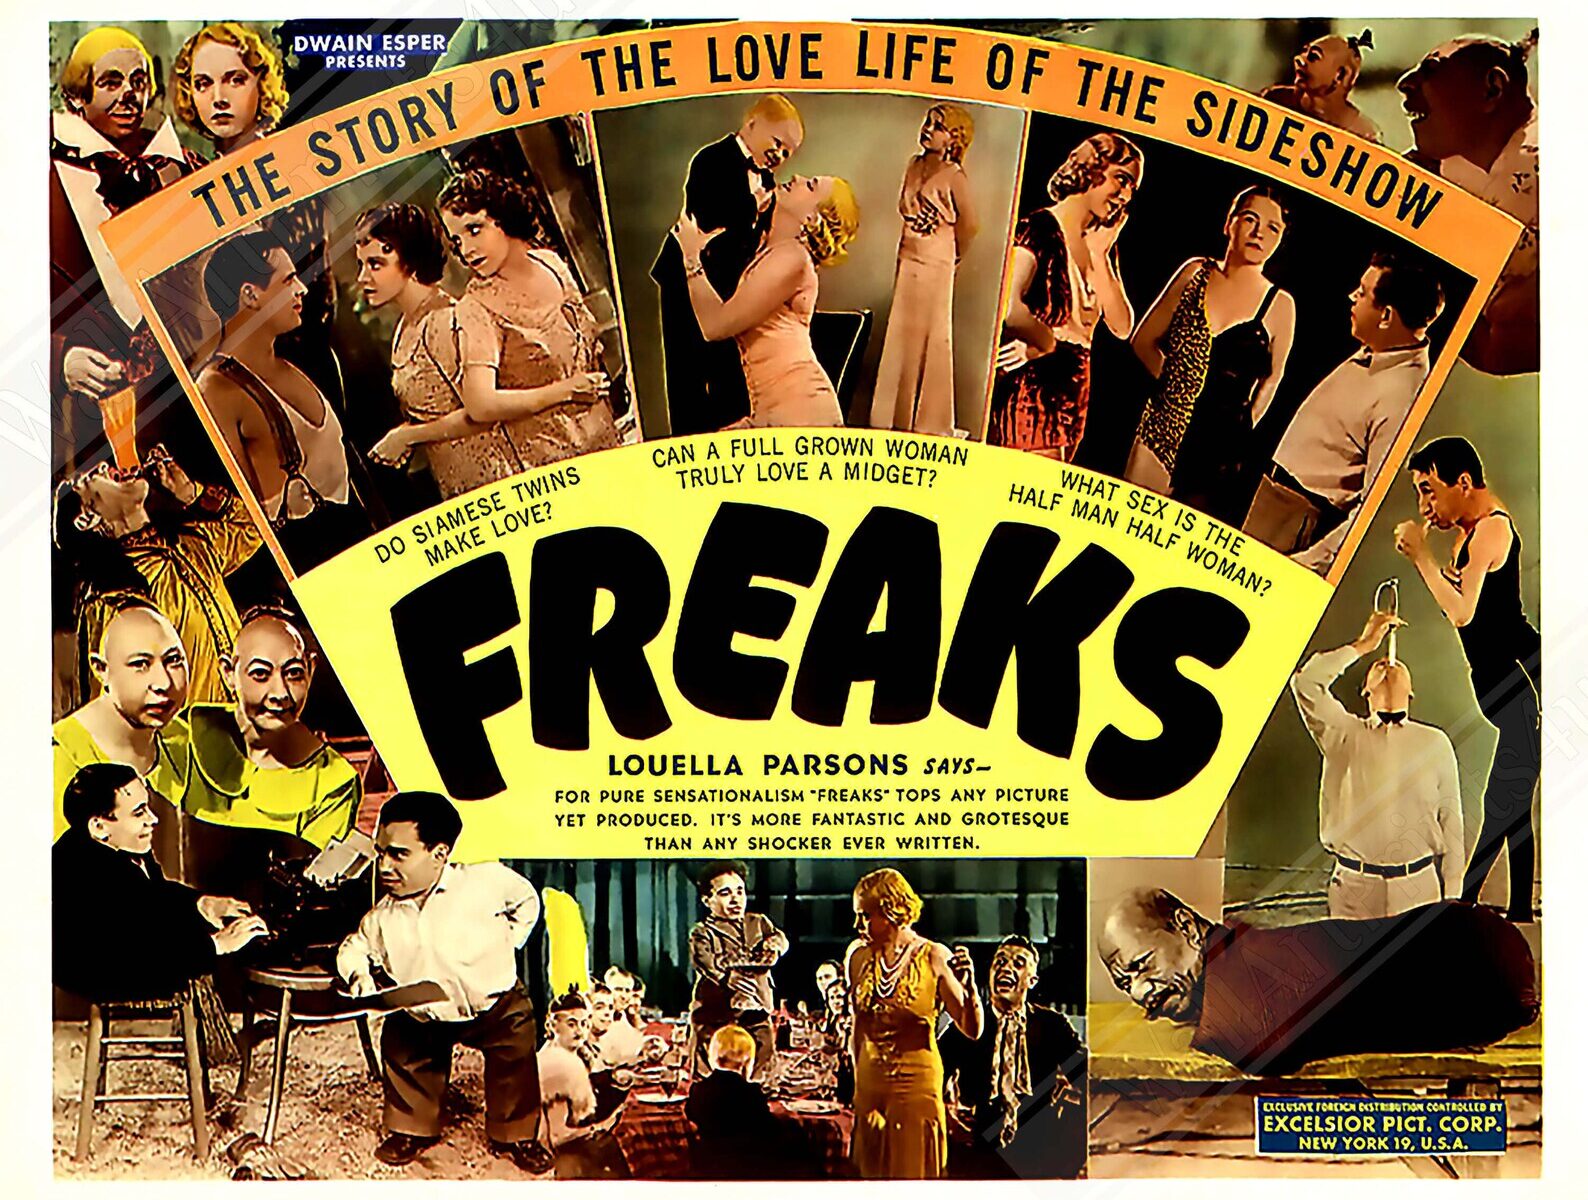 Image shows a poster of the movie "Freaks." A banner on top reads "The Story of the Love Life of the Sideshow." On the bottom with 3 different pictures, reads "Do Siamese Twins Make Love?" "Can a Full Grown Woman Truly Love a Midget?" and "What Sex is the Half Man Half Woman?" The bottom quote reads "Louella Parsons says 'for pure sensationalism "Freaks" tops any picture yet produced. It's more fantastic and grotesque than any shocker ever written' The surrounding pictures show many stills from the movie, including pictures of the siamese twins and sword eater.